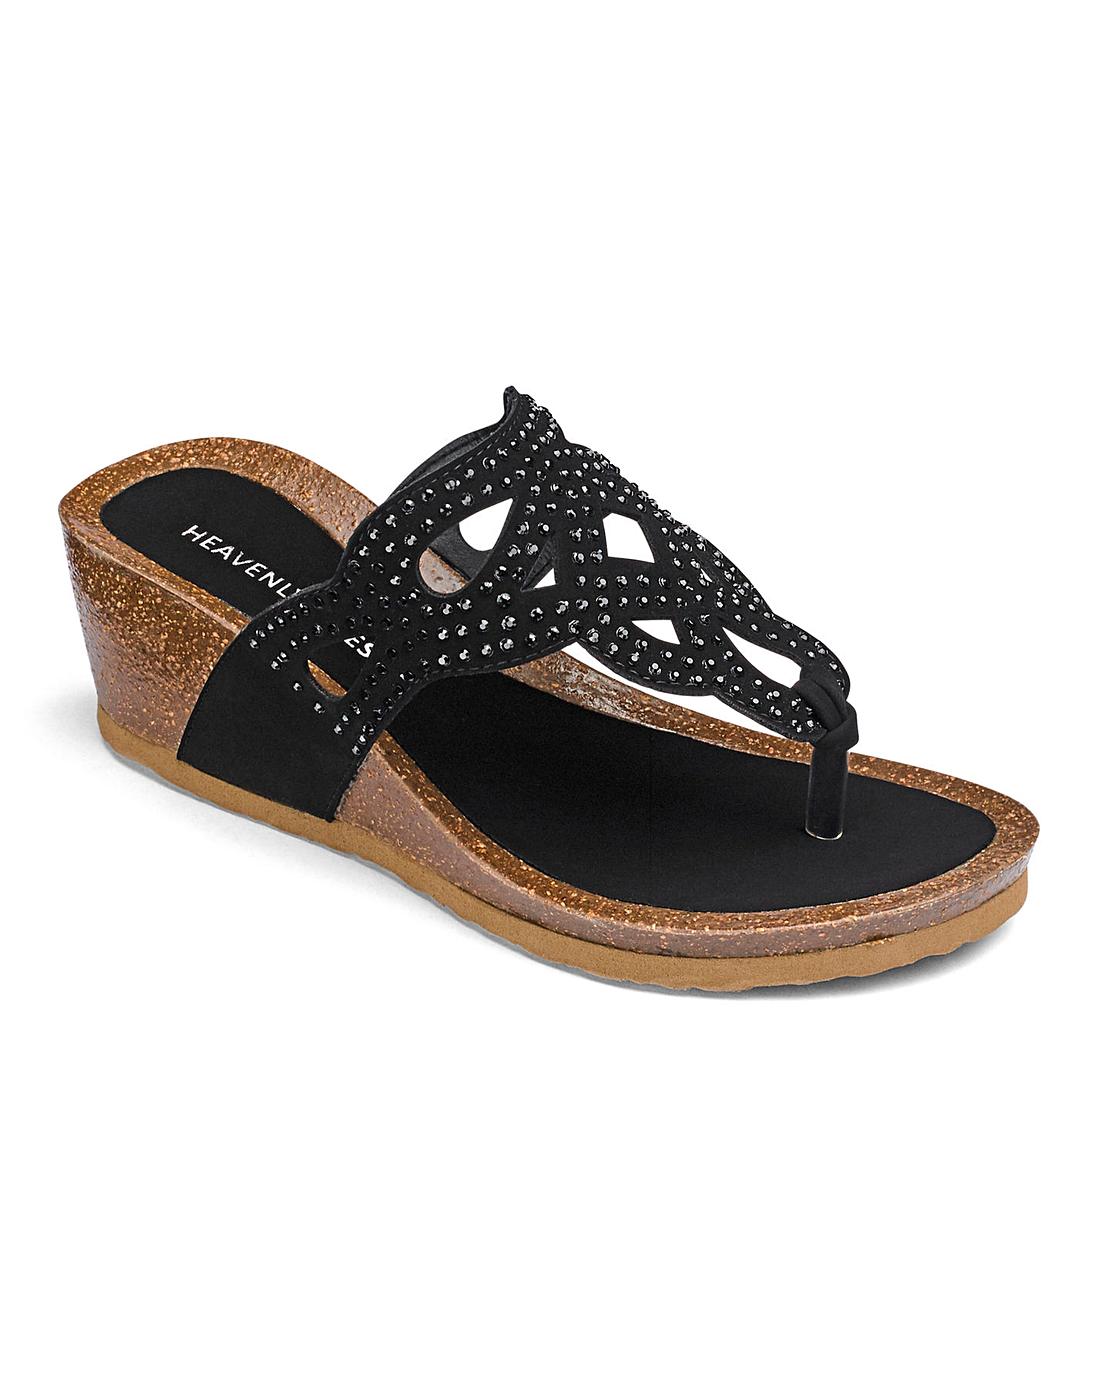 Heavenly Soles Wedge Sandals EEE Fit | Crazy Clearance